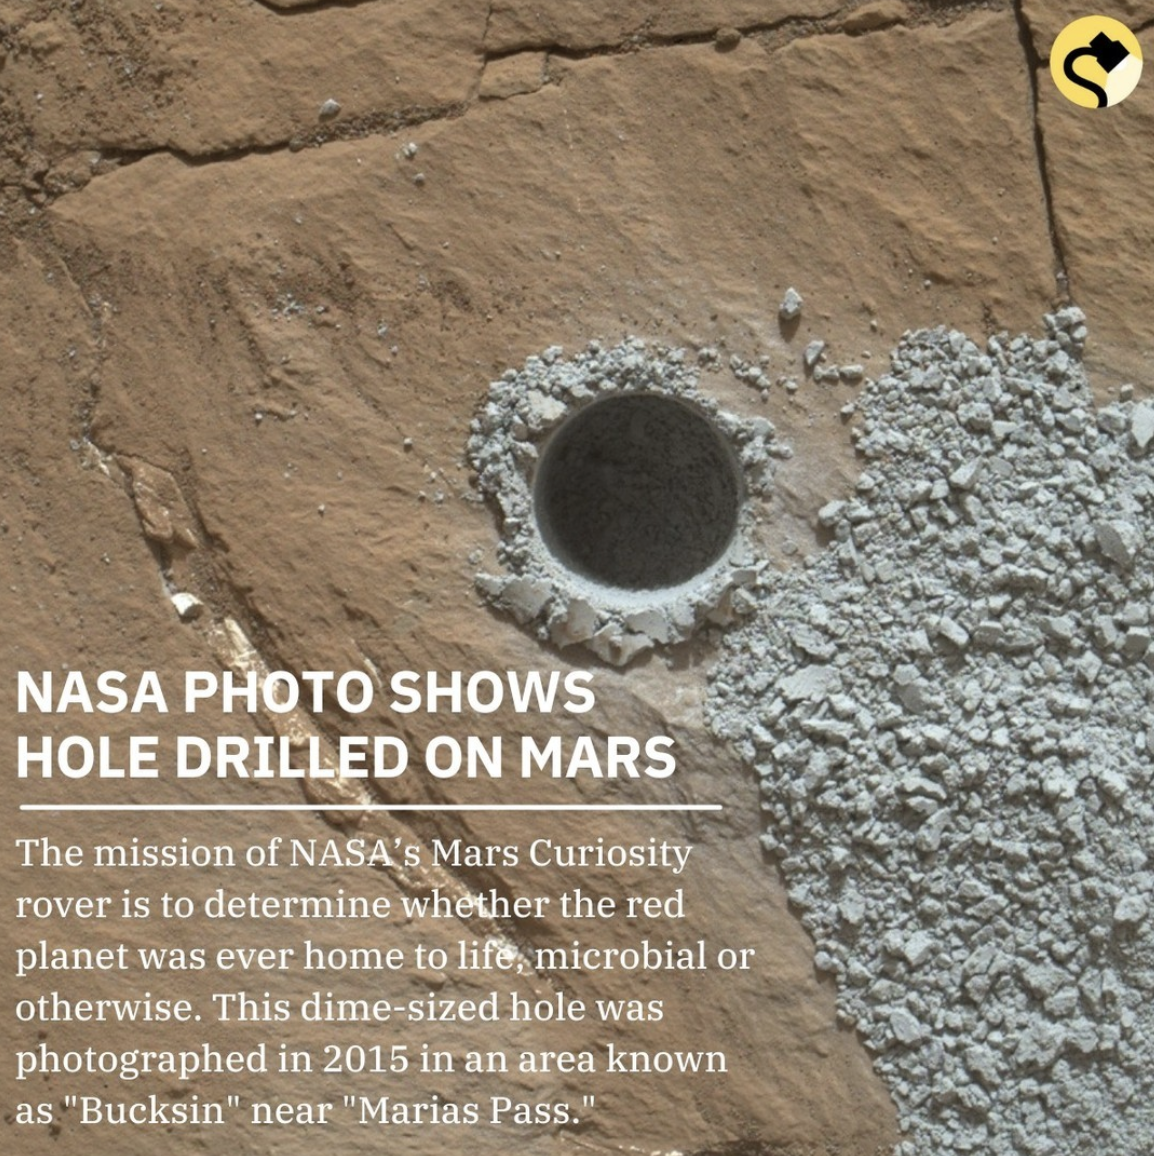 Snopes Facts - hole drilled in mars - Nasa Photo Shows Hole Drilled On Mars The mission of Nasa's Mars Curiosity rover is to determine whether the red planet was ever home to life, microbial or otherwise. This dimesized hole was photographed in 2015 in an